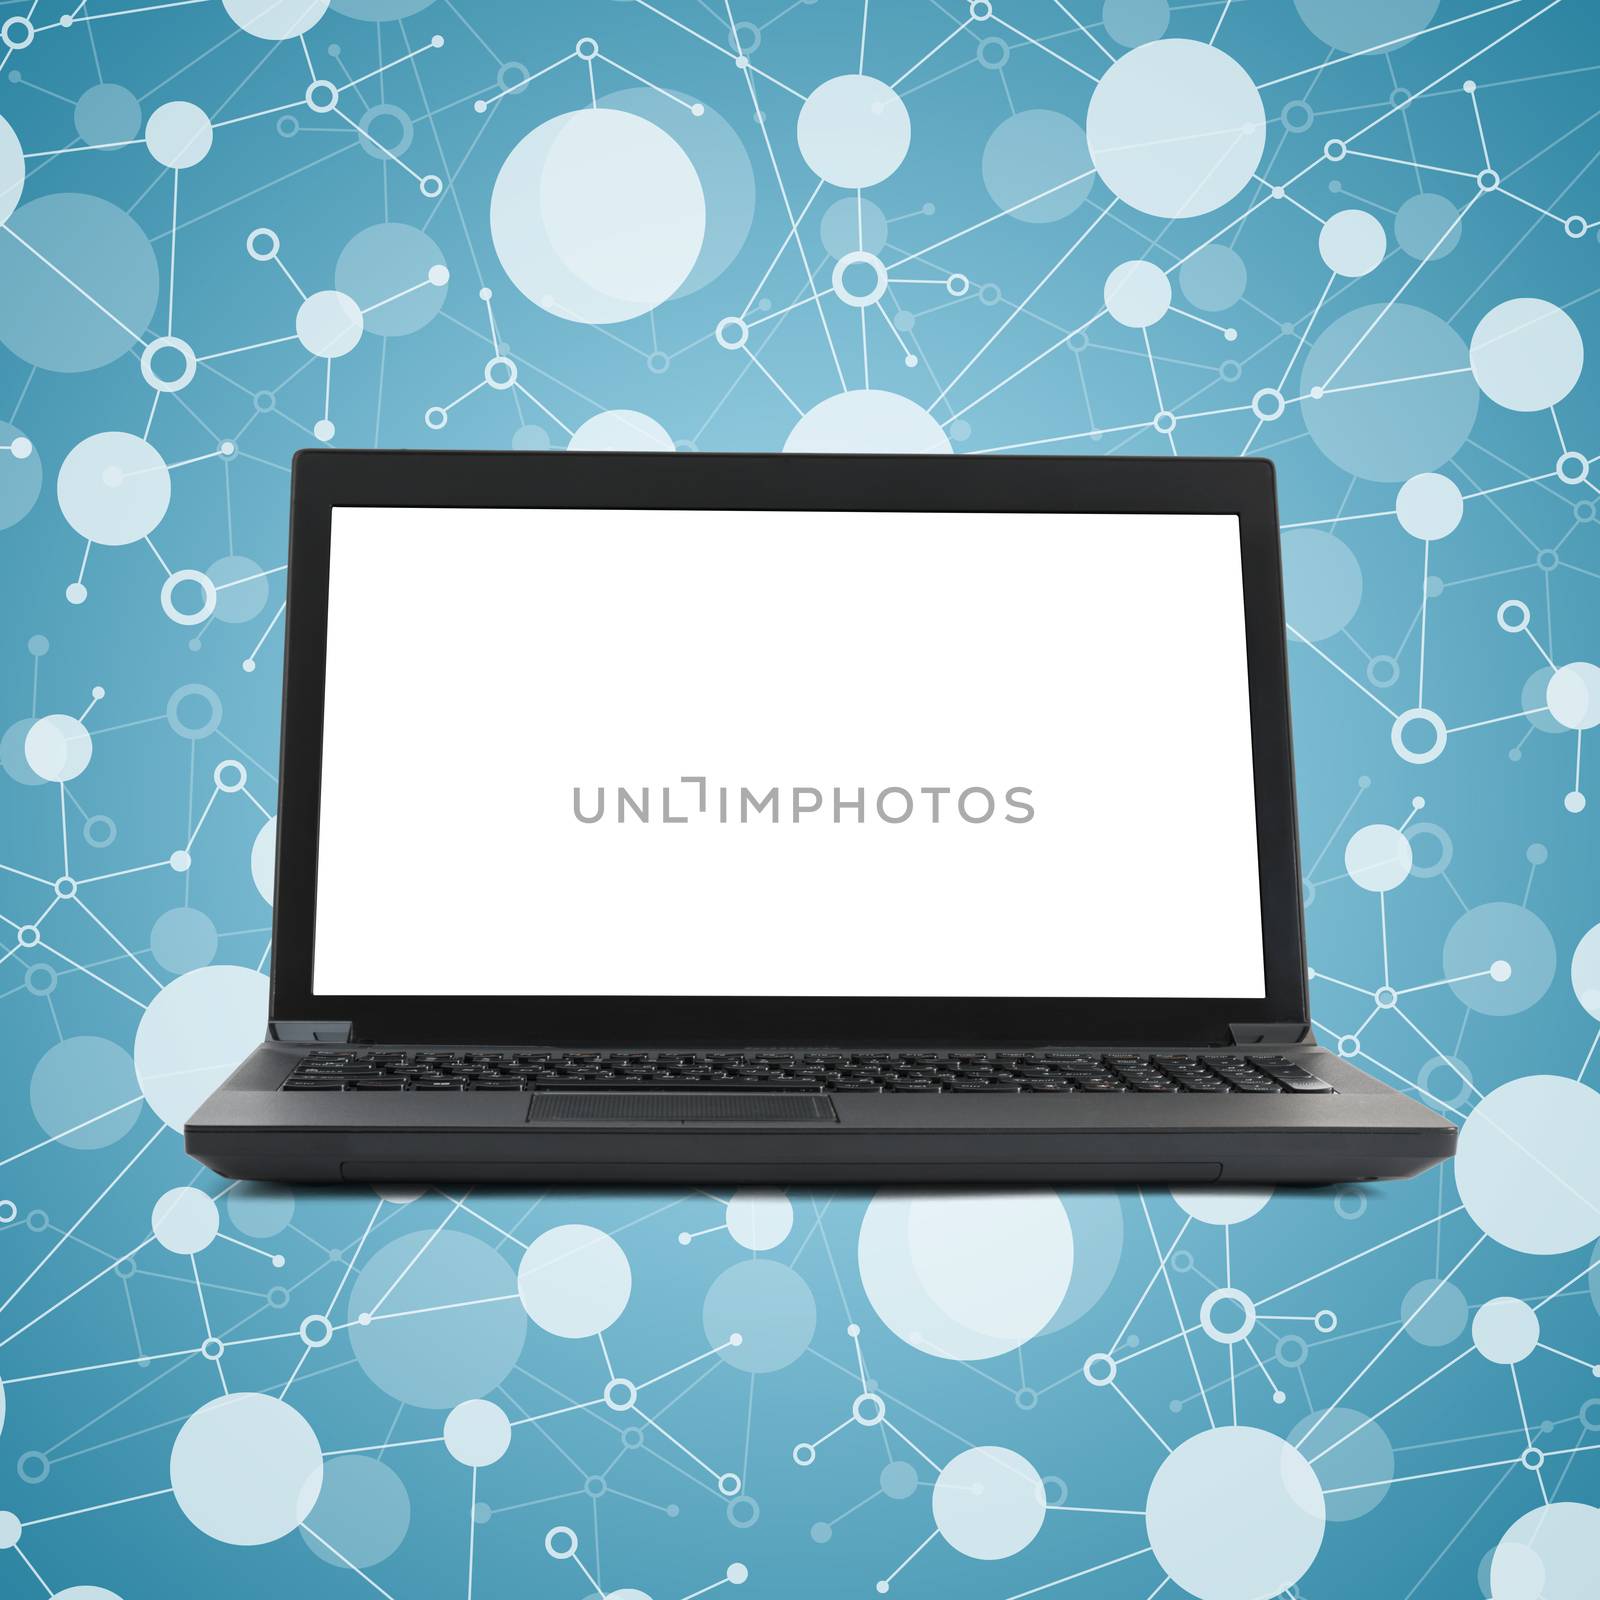 Black laptop with blank screen and connected dots on blue background